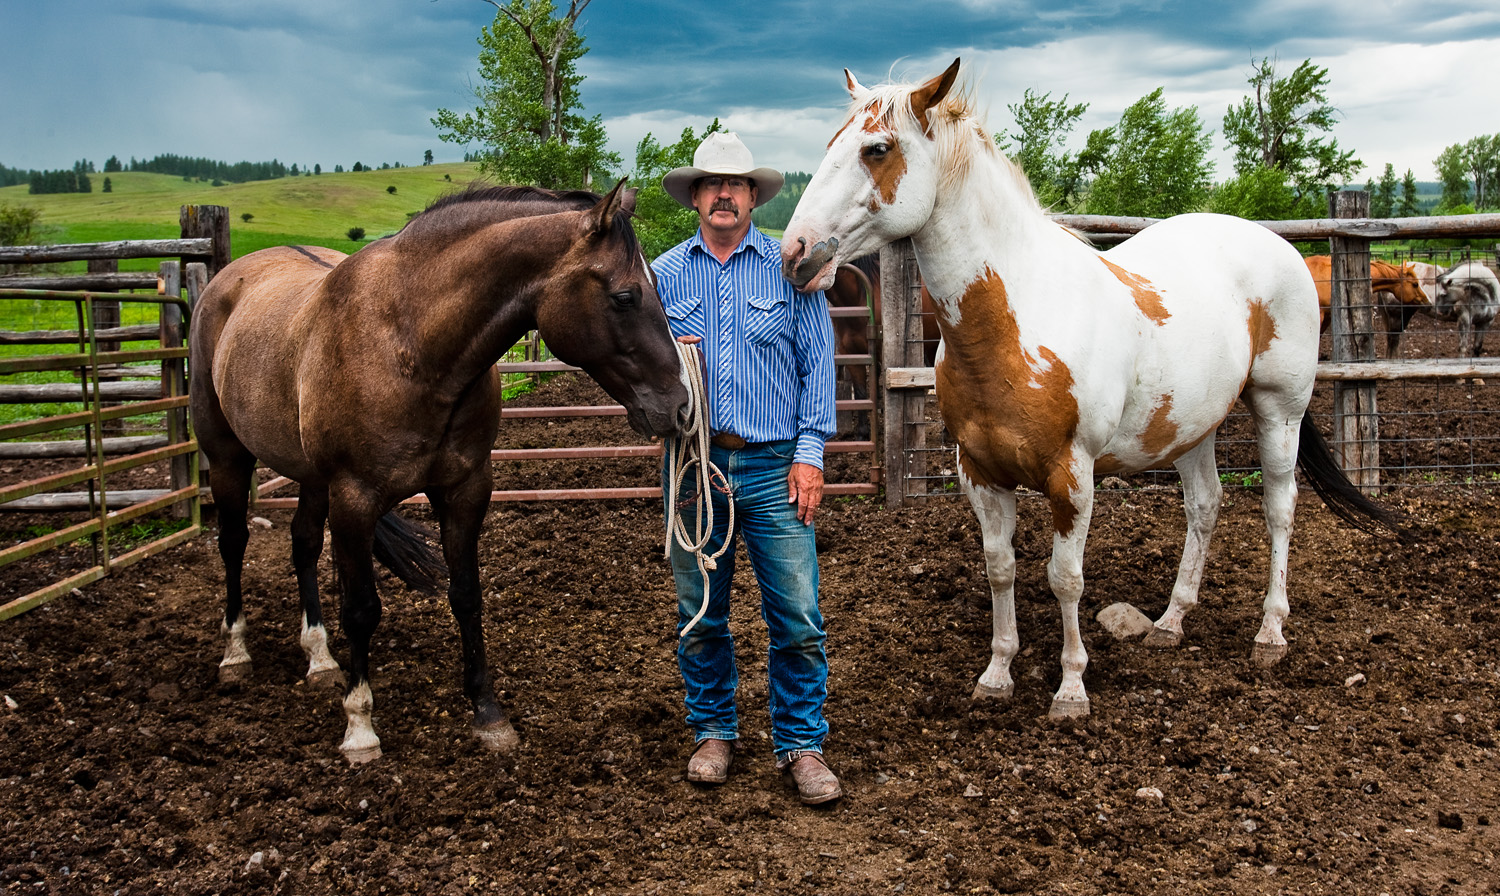 Cowboy rancher with 2 horses on location on rural ranch